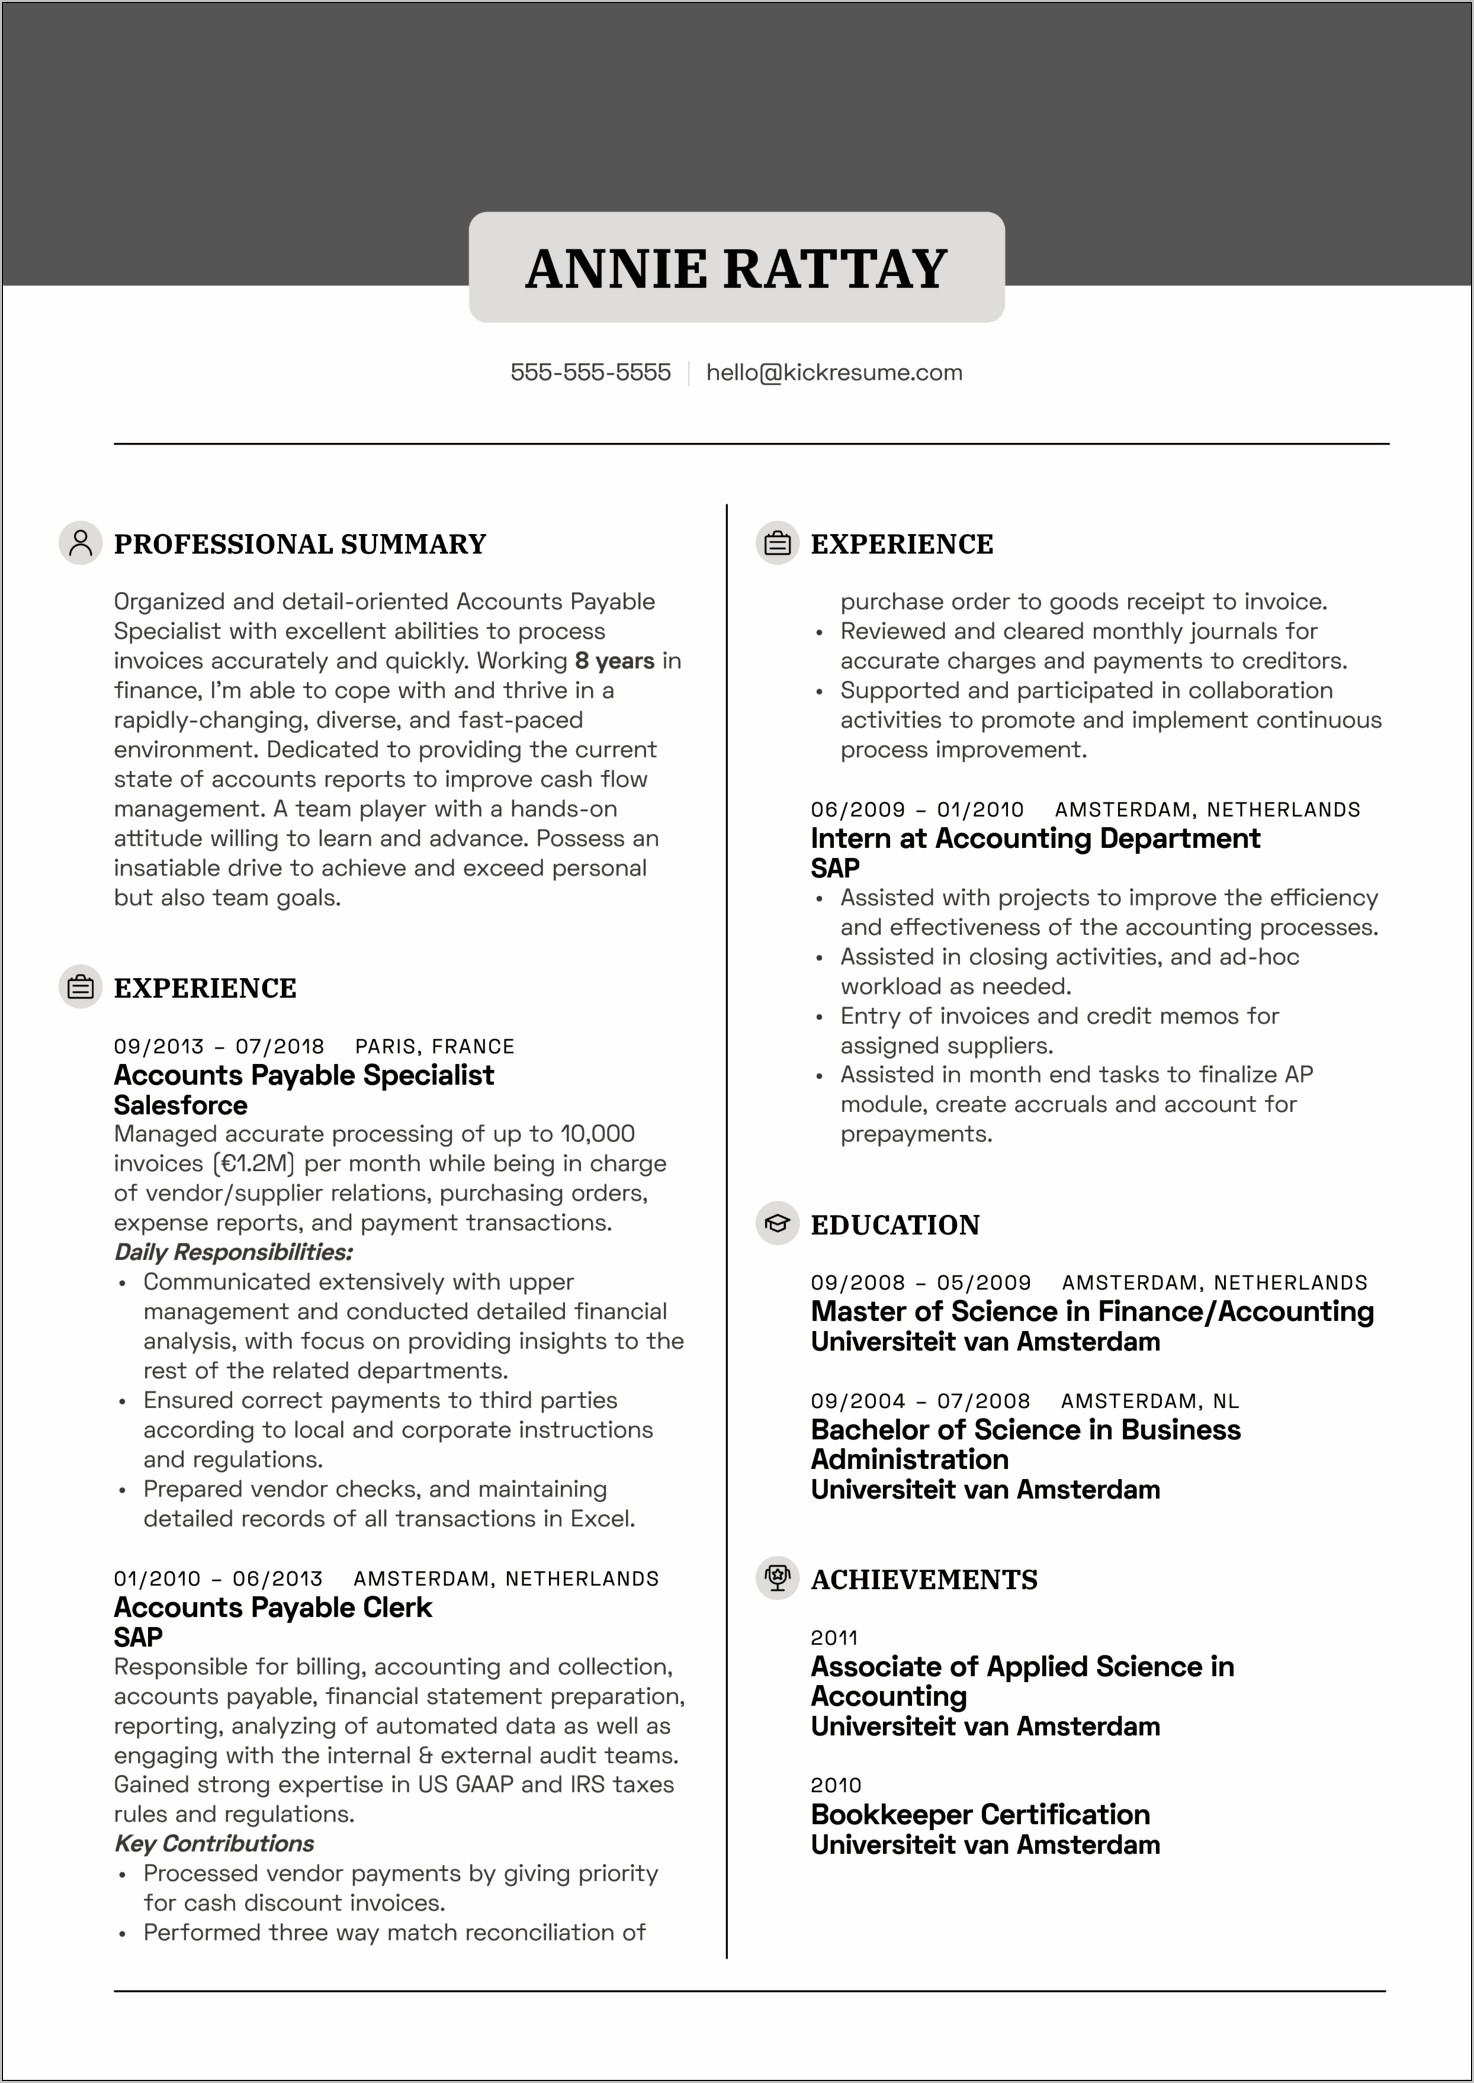 Sample Resume Personal Achievements Contributions Statement